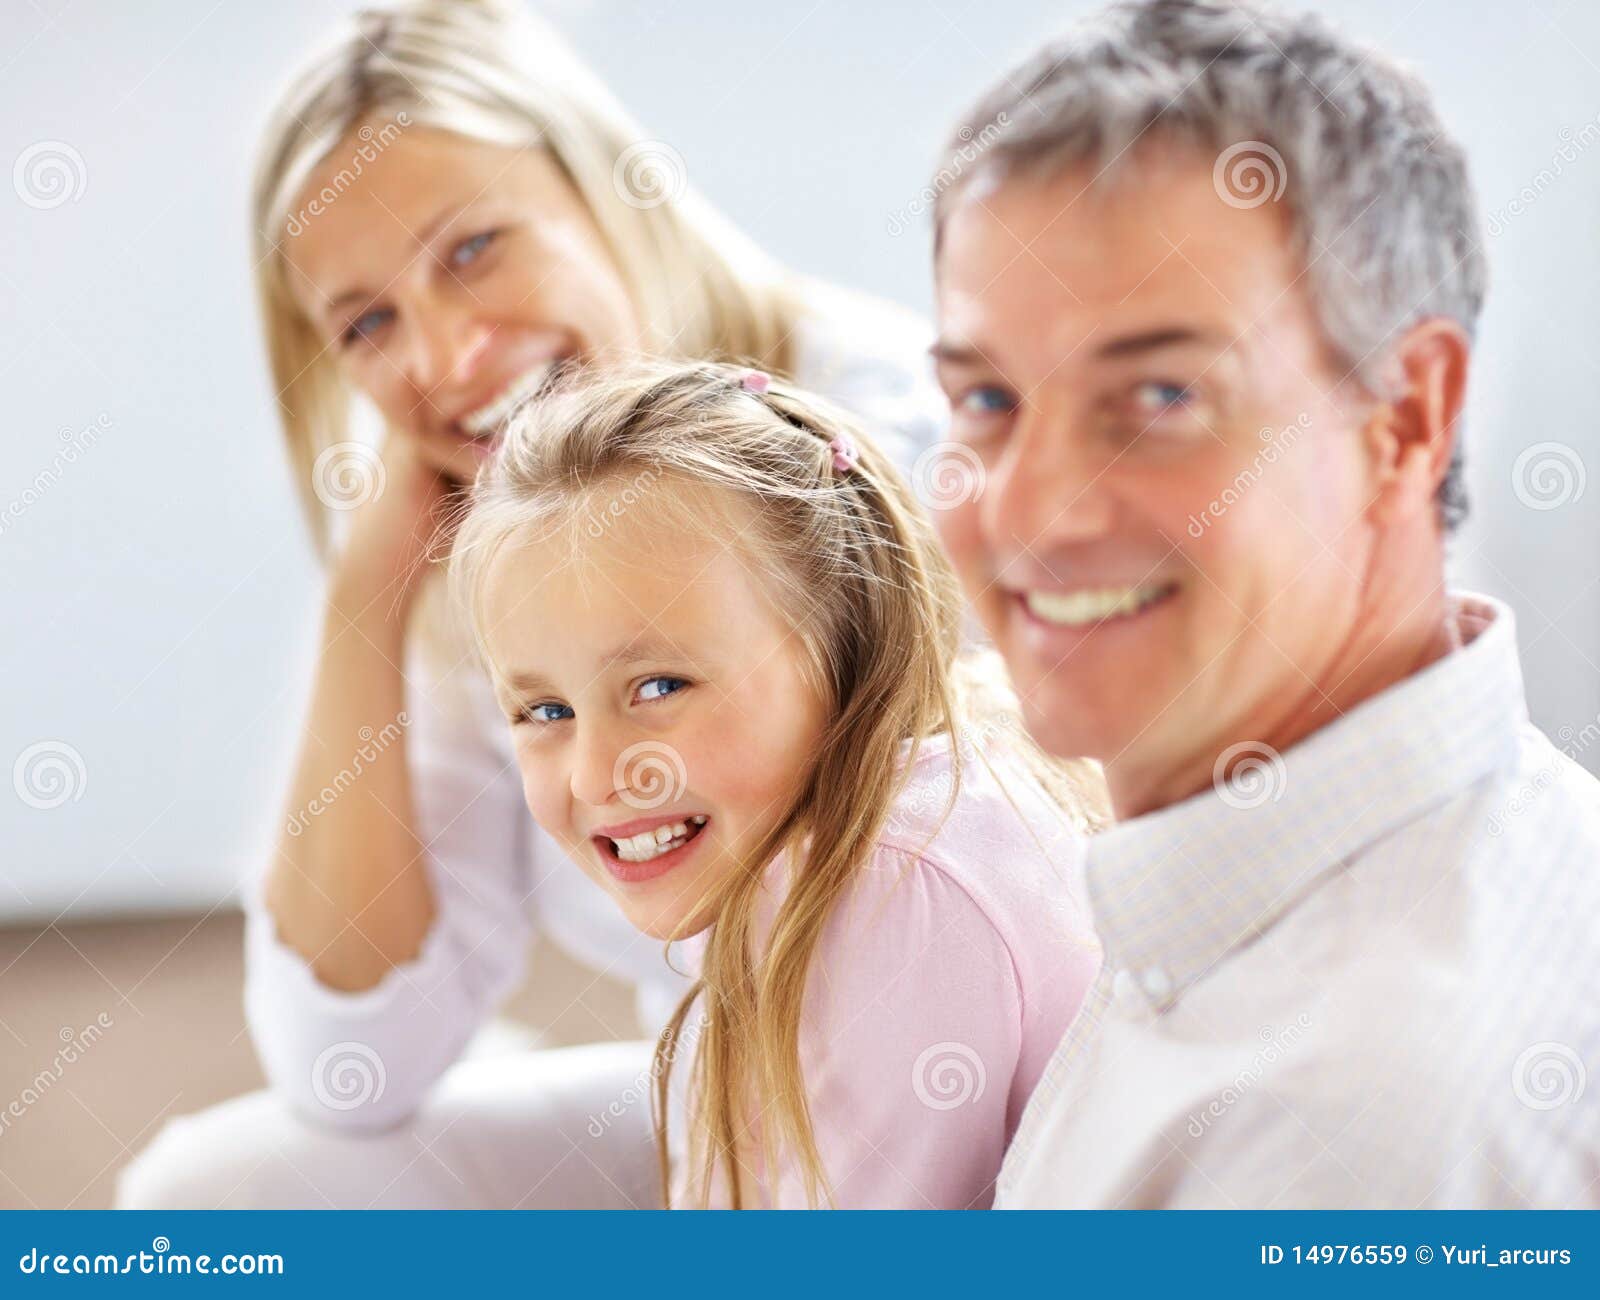 young-girl-sitting-her-parents-smiling-14976559.jpg